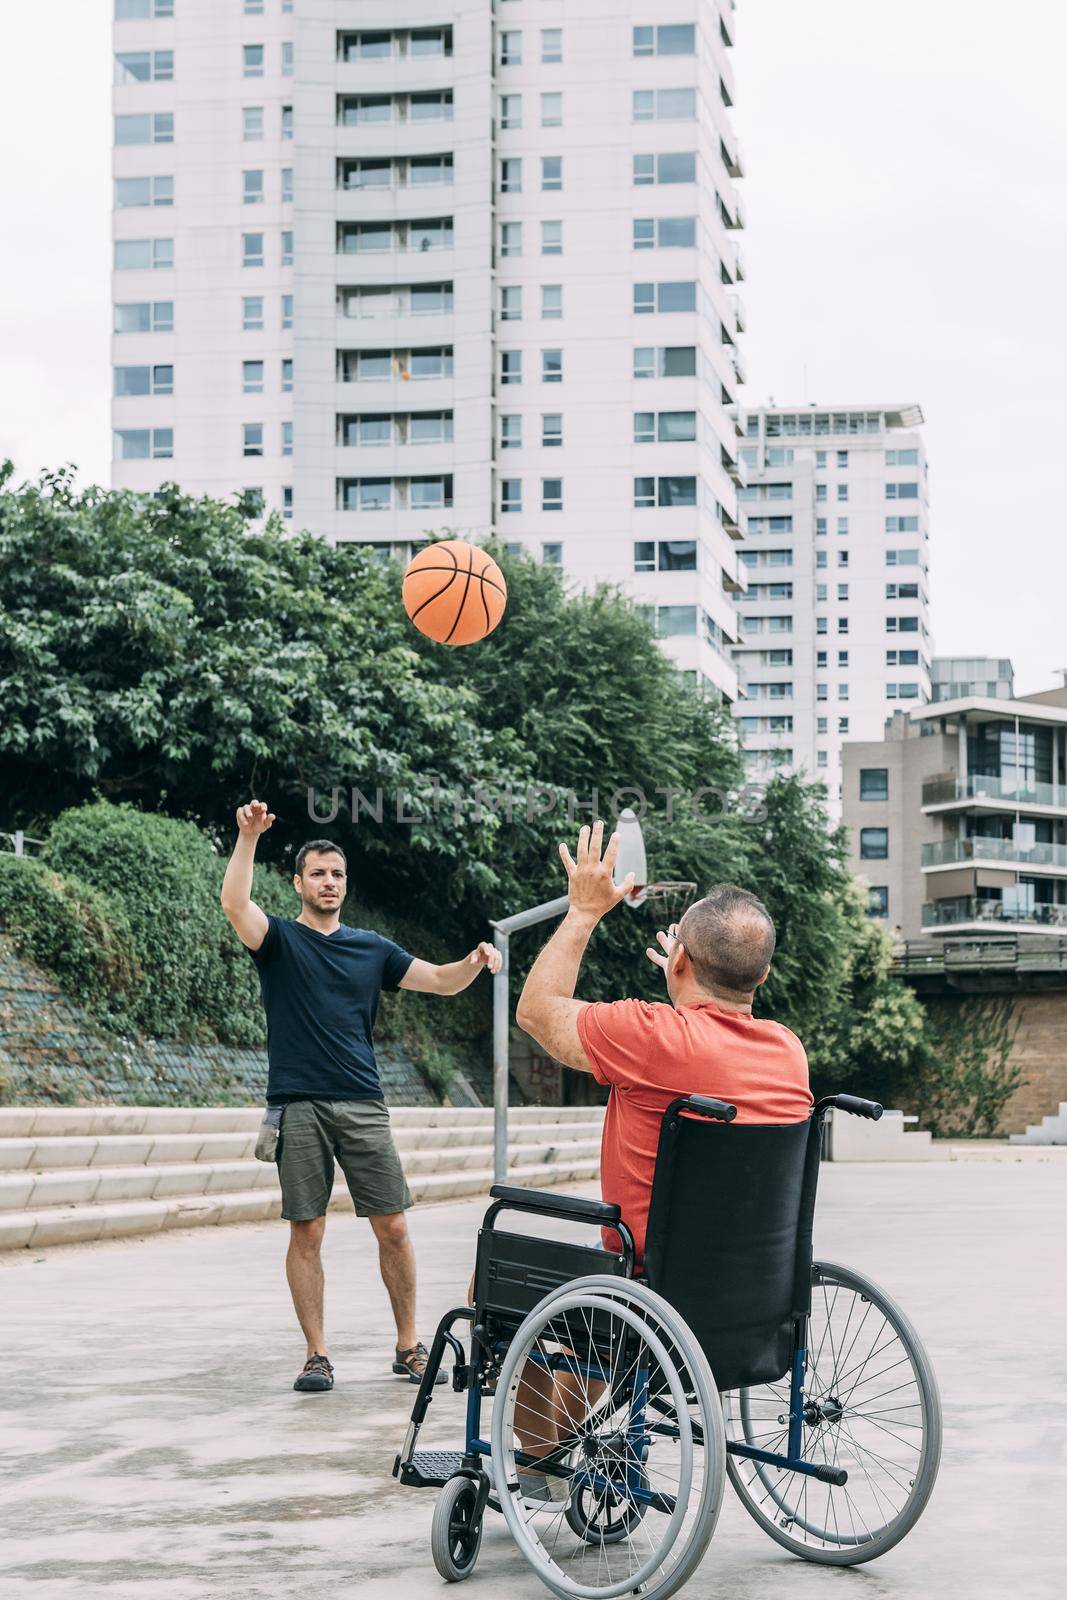 joyful handicapped man in wheelchair playing basketball with a friend with ball, concept of adaptive sports and physical activity, rehabilitation for people with physical disabilities, vertical photo